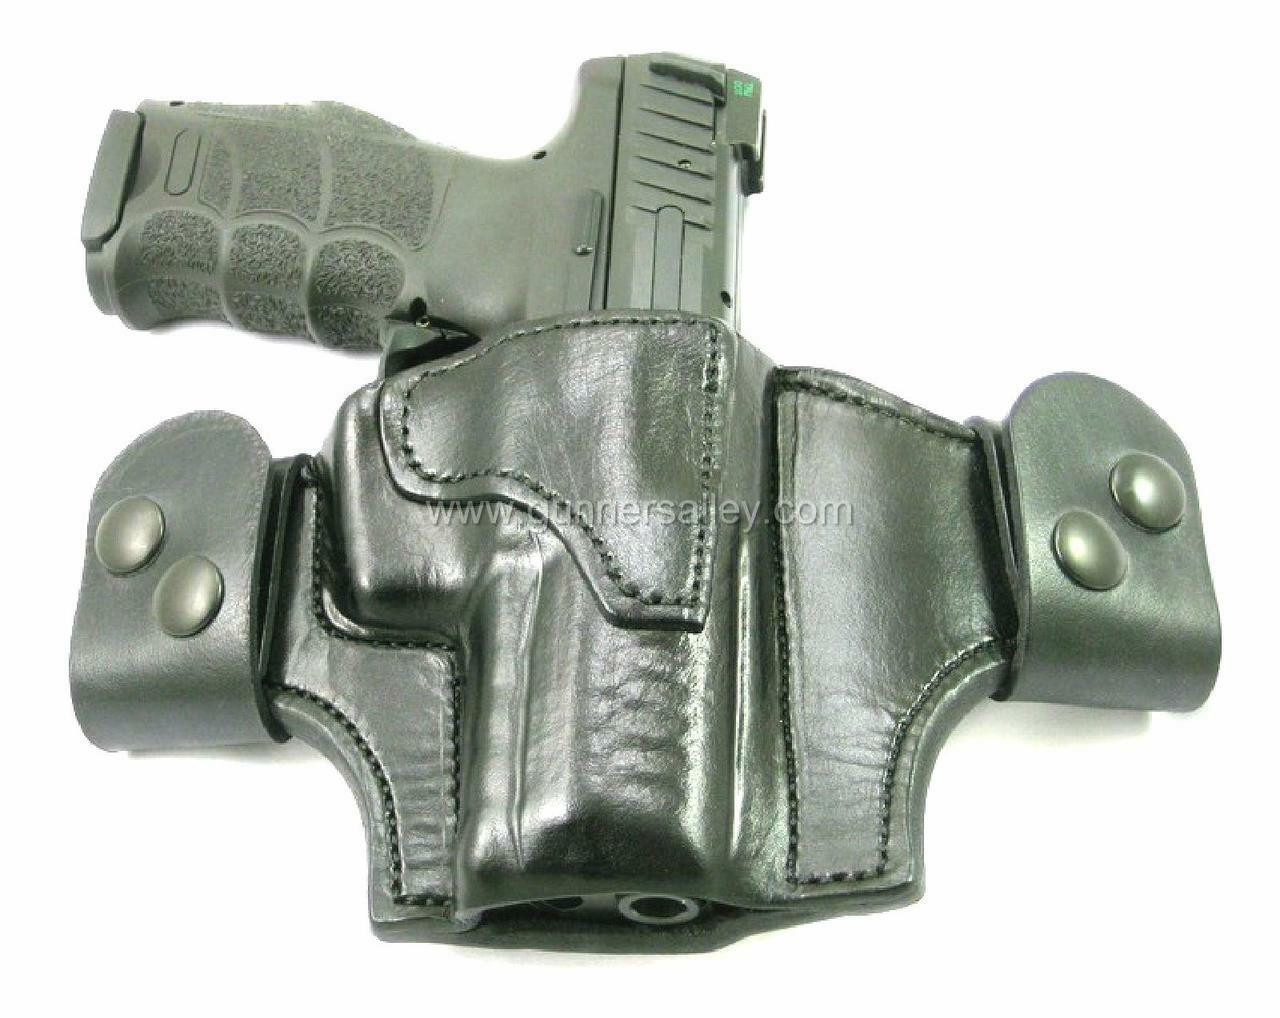 Front View - RH Black MTR Custom Vertical Deluxe Full Size Quick Snap Holster Shown with a H&K VP9 for Demonstration Purposes